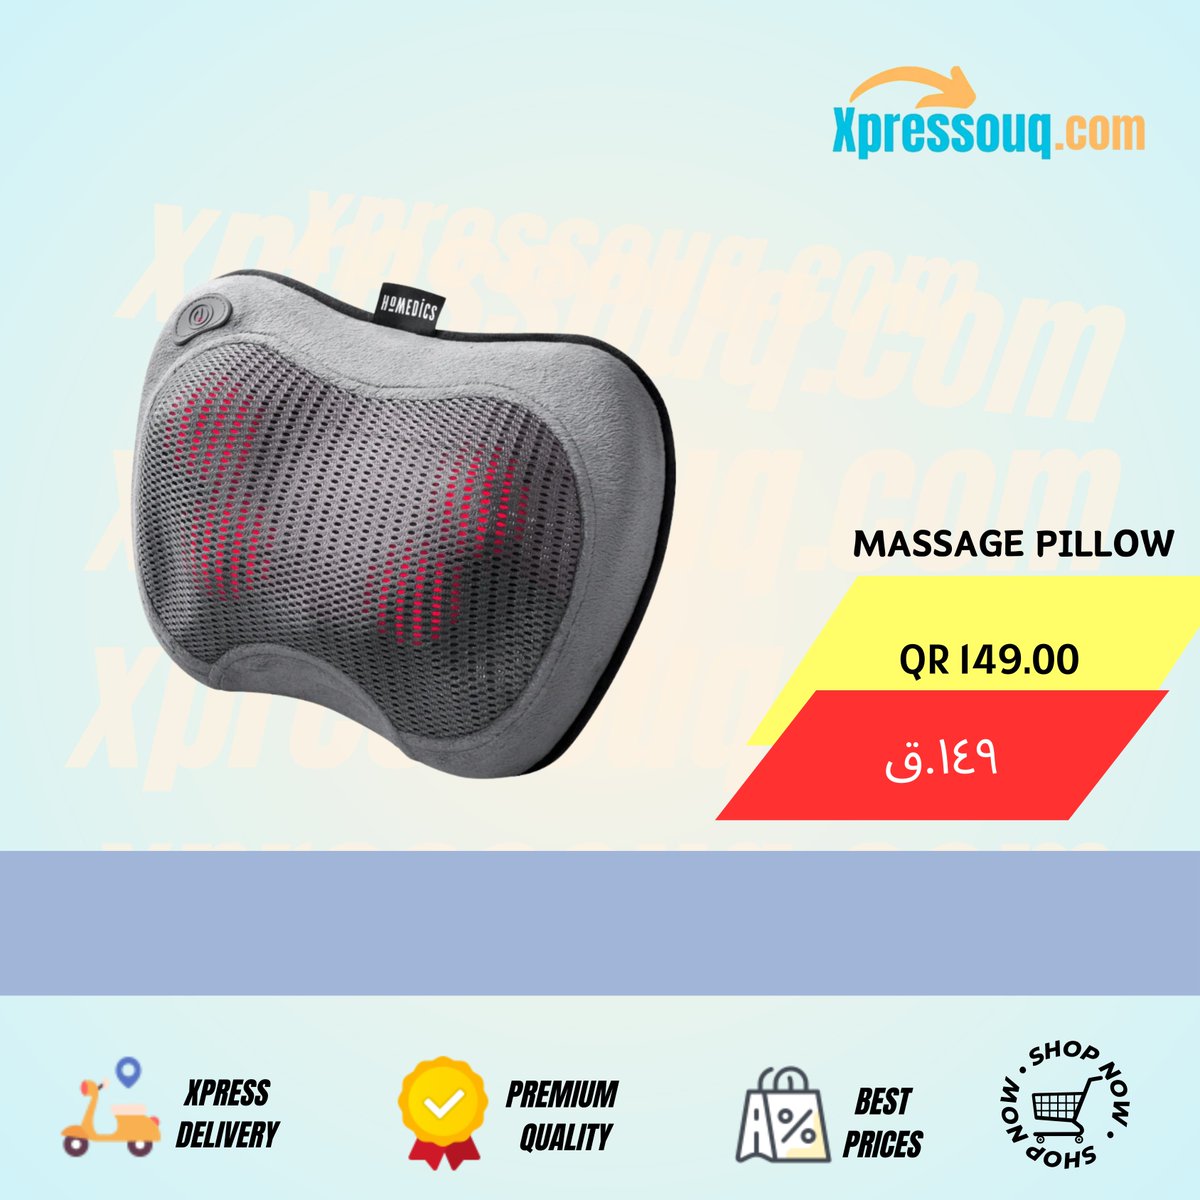 Relaxation in Reach: Massage Pillow

🎯Order Now @ Just QR 149 only 🏃🏻‍
💸Cash on Delivery💸
🚗xpress Delivery🛻

xpressouq.com/products/massa…

#RelaxAndUnwind #MassageTherapy #StressRelief #SelfCareSunday #PamperYourself #MuscleRelief #NeckPillow #BackPainRelief #WellnessJourney